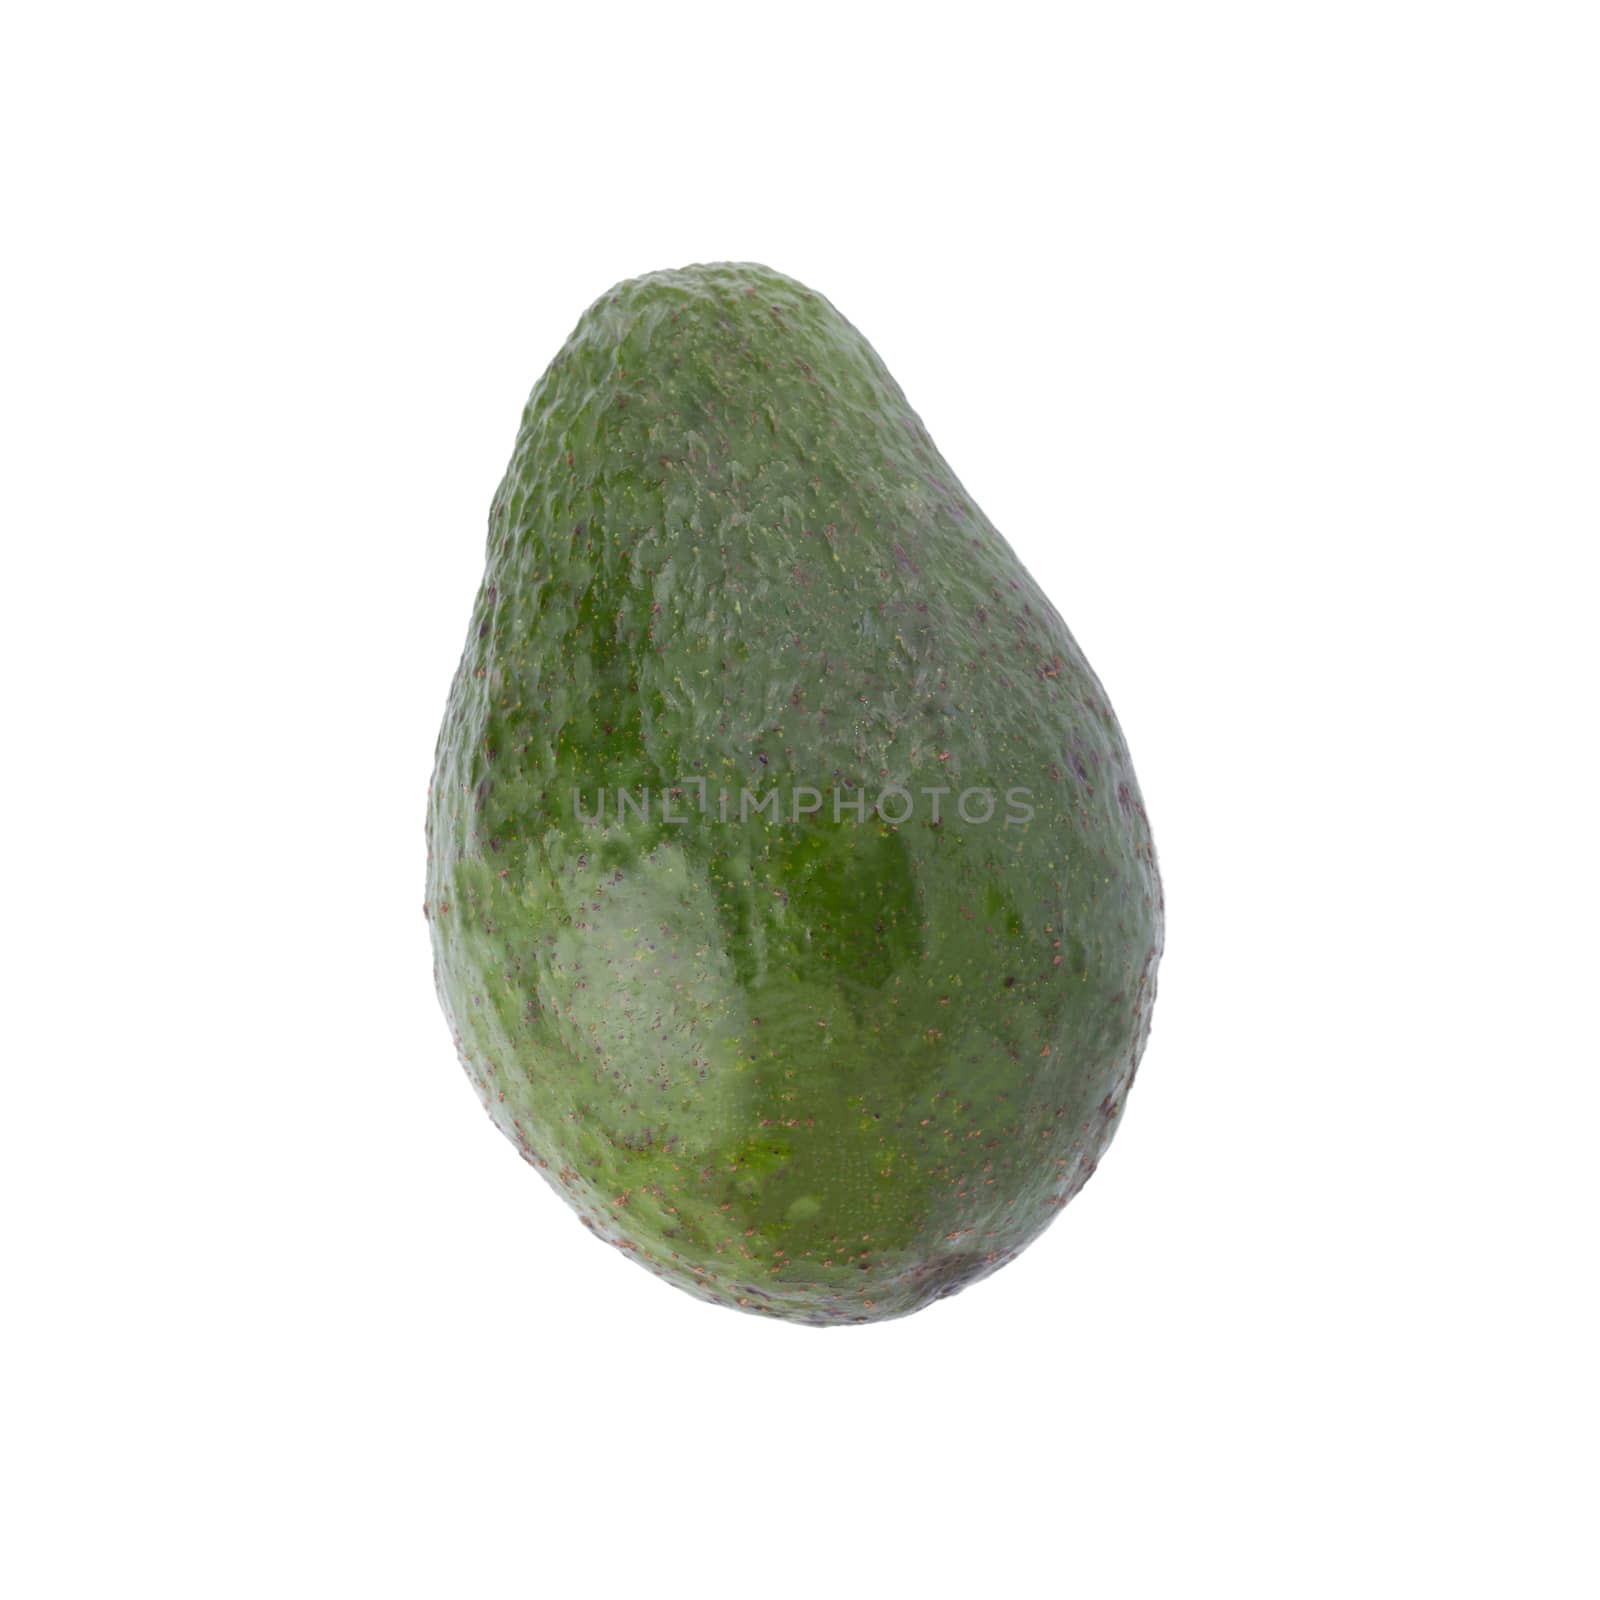 Green ripe avocado isolated on the white background by kaiskynet